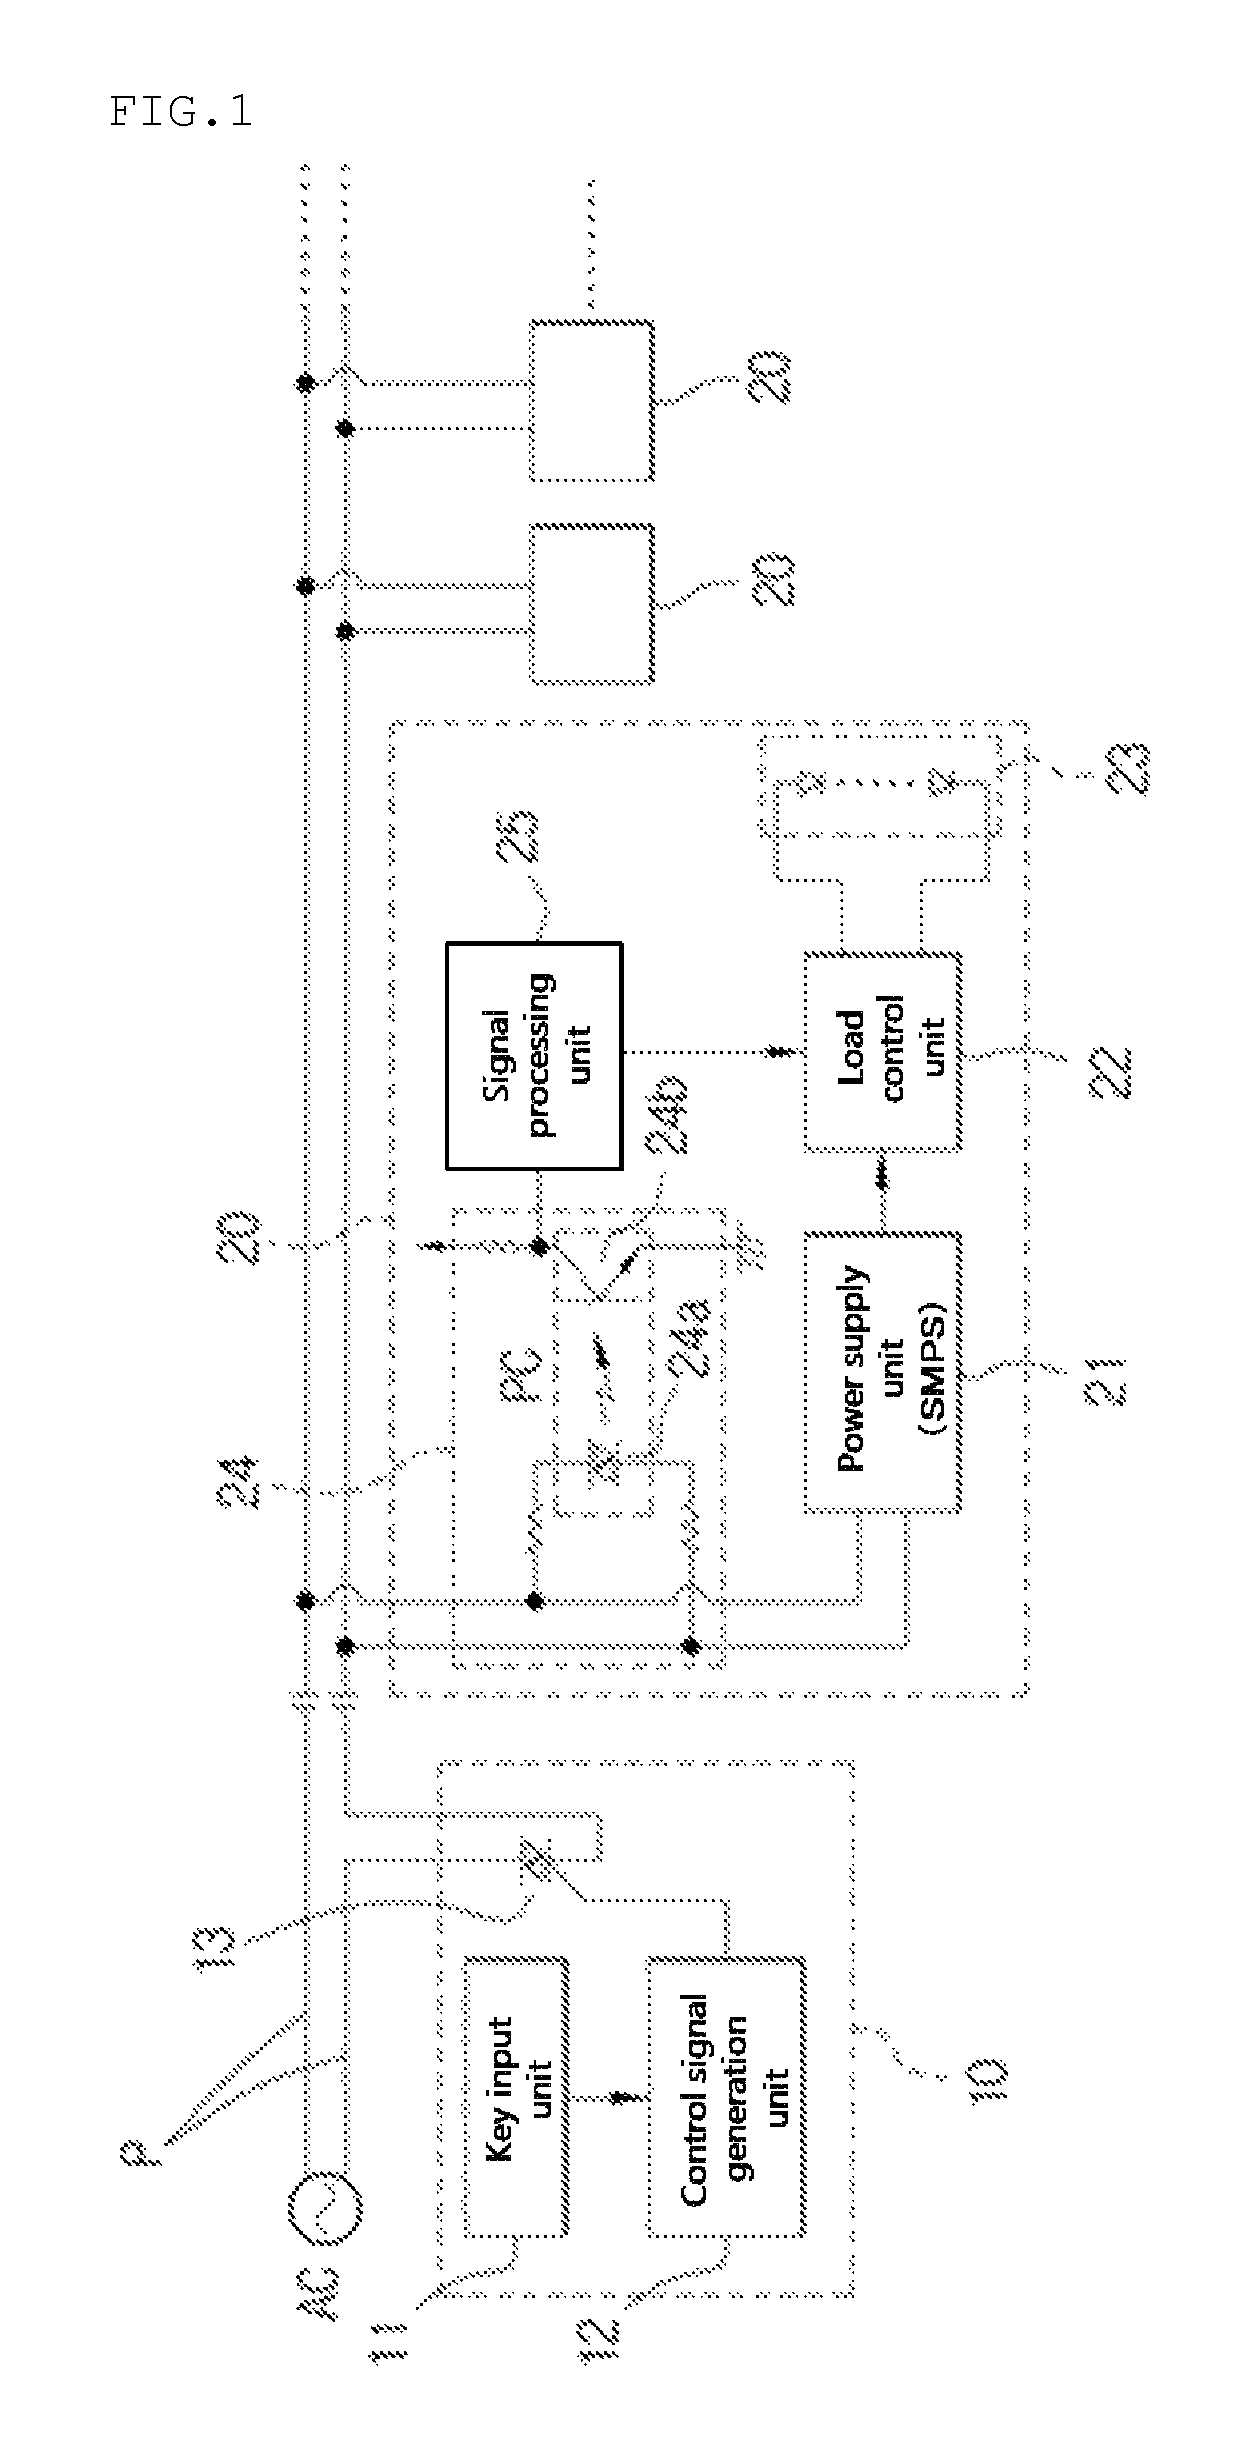 Closed-circuit power line communication system for large capacity load